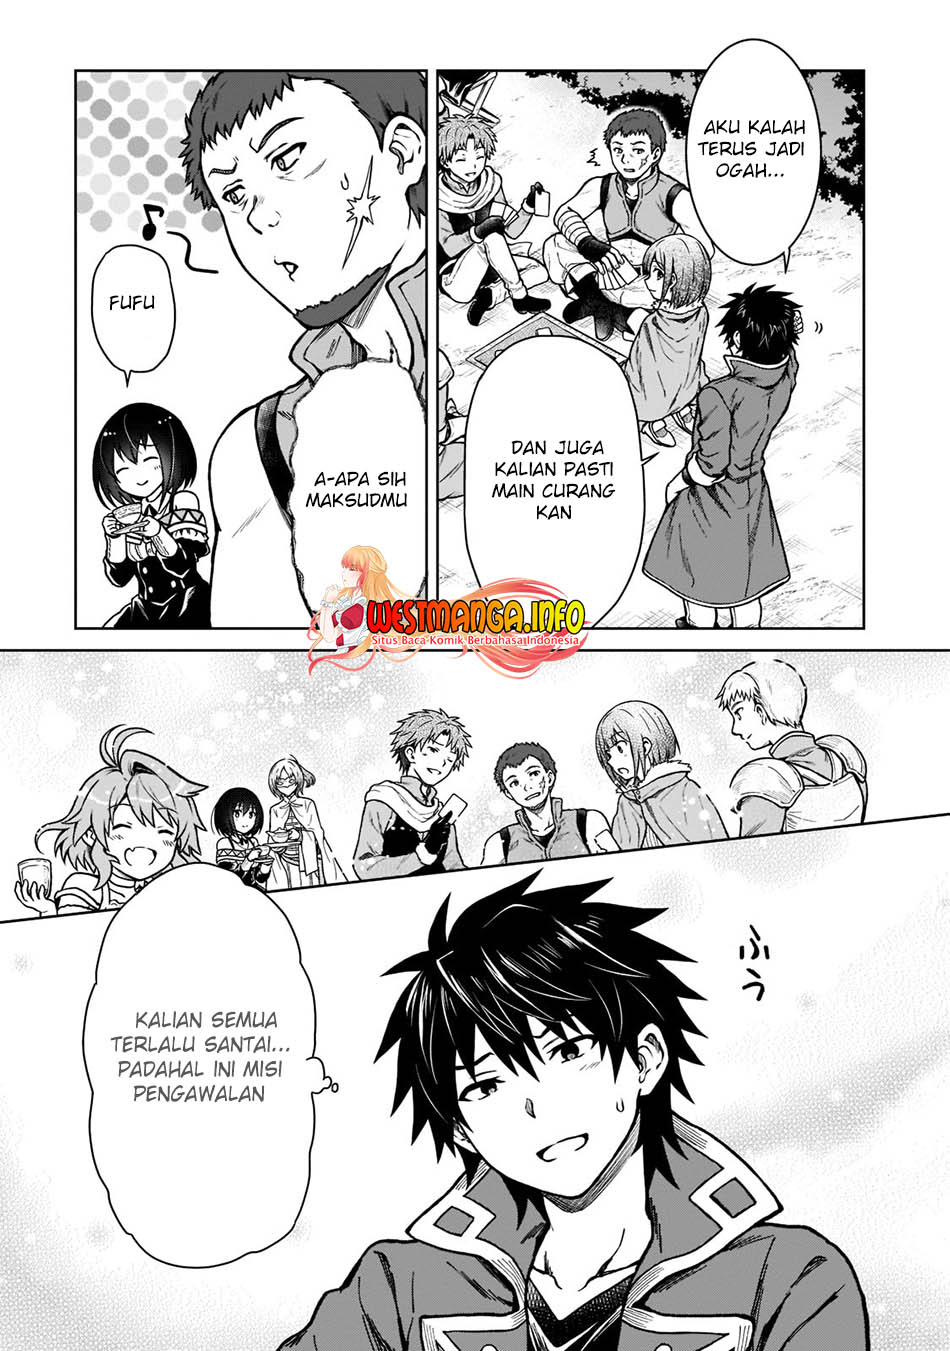 Dilarang COPAS - situs resmi www.mangacanblog.com - Komik d rank adventurer invited by a brave party and the stalking princess 008 - chapter 8 9 Indonesia d rank adventurer invited by a brave party and the stalking princess 008 - chapter 8 Terbaru 23|Baca Manga Komik Indonesia|Mangacan